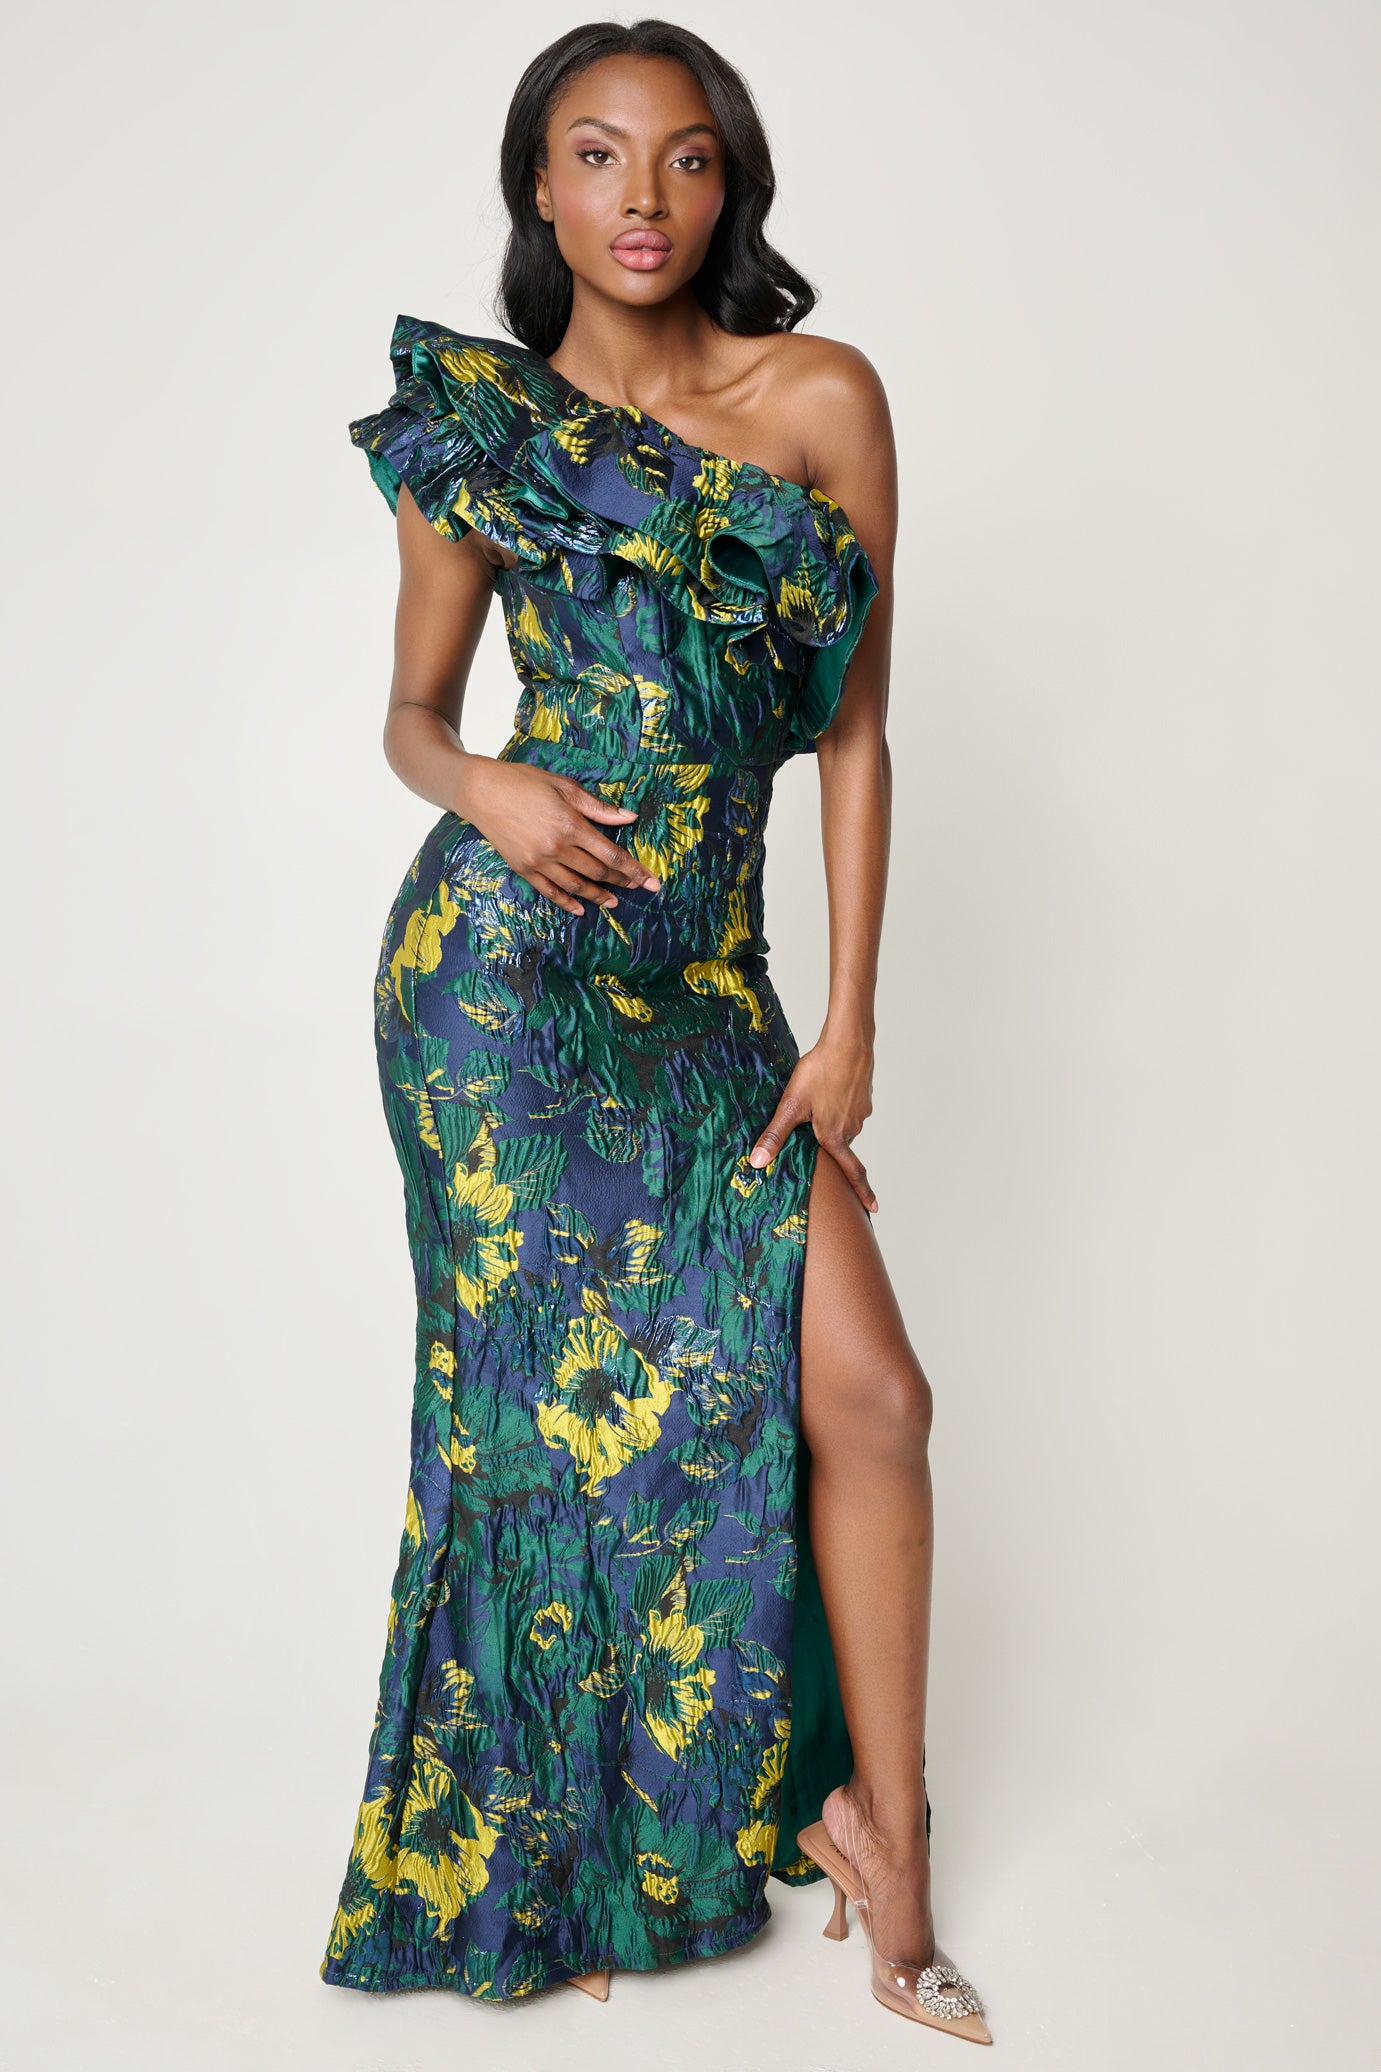 Bonne Nuit One Shoulder Gown in Emerald by Bariano - RENTAL